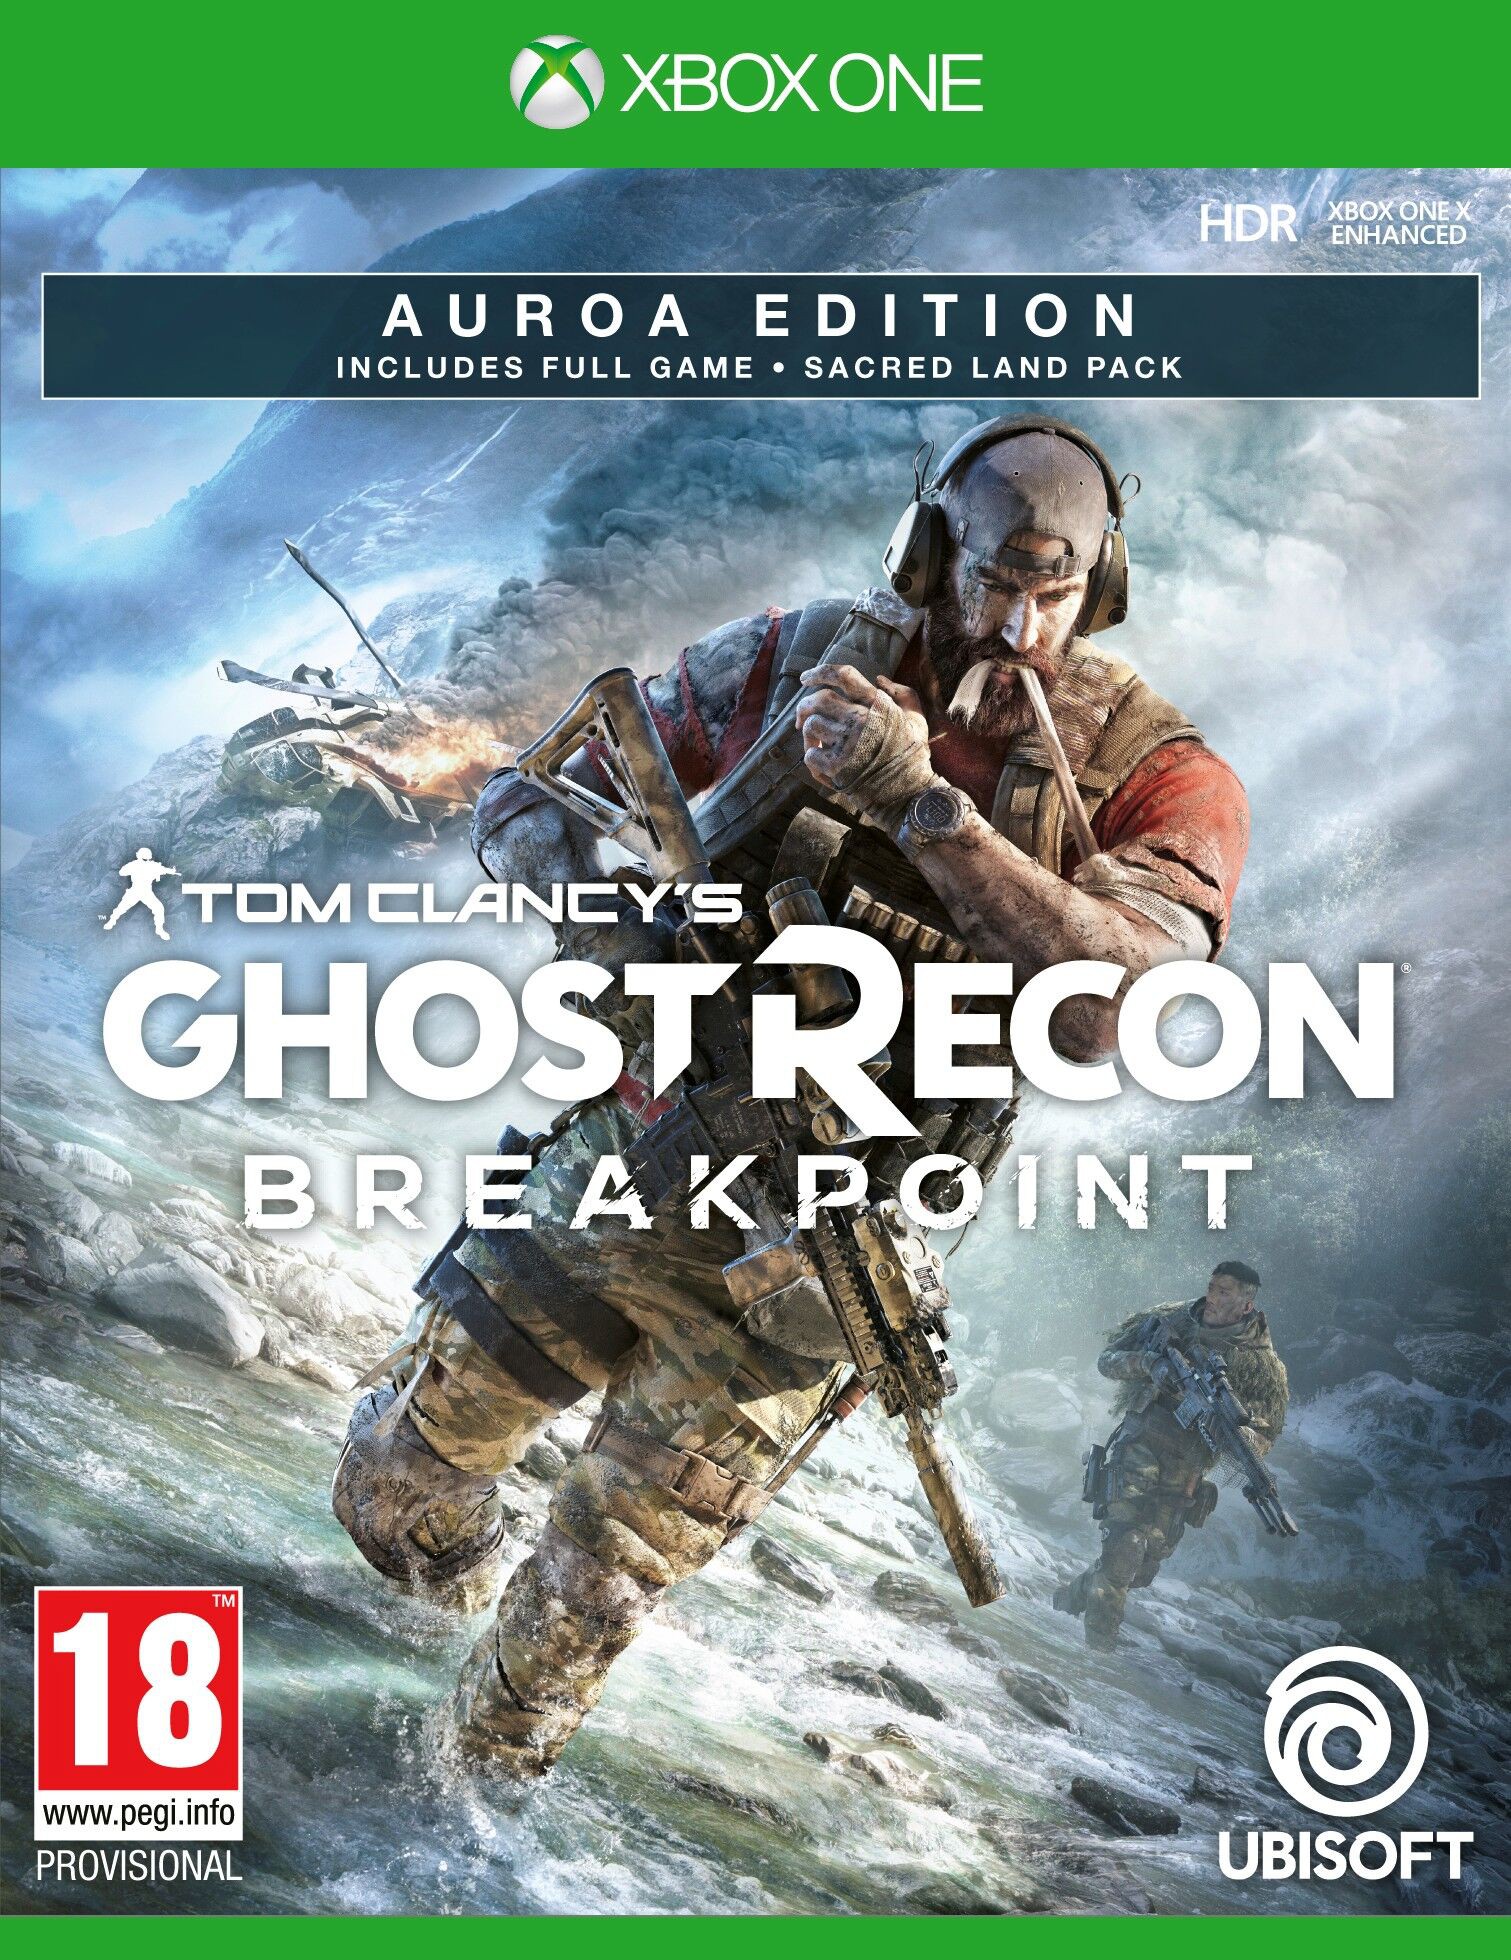 Tom Clancy's Ghost Recon Breakpoint AUROA edition